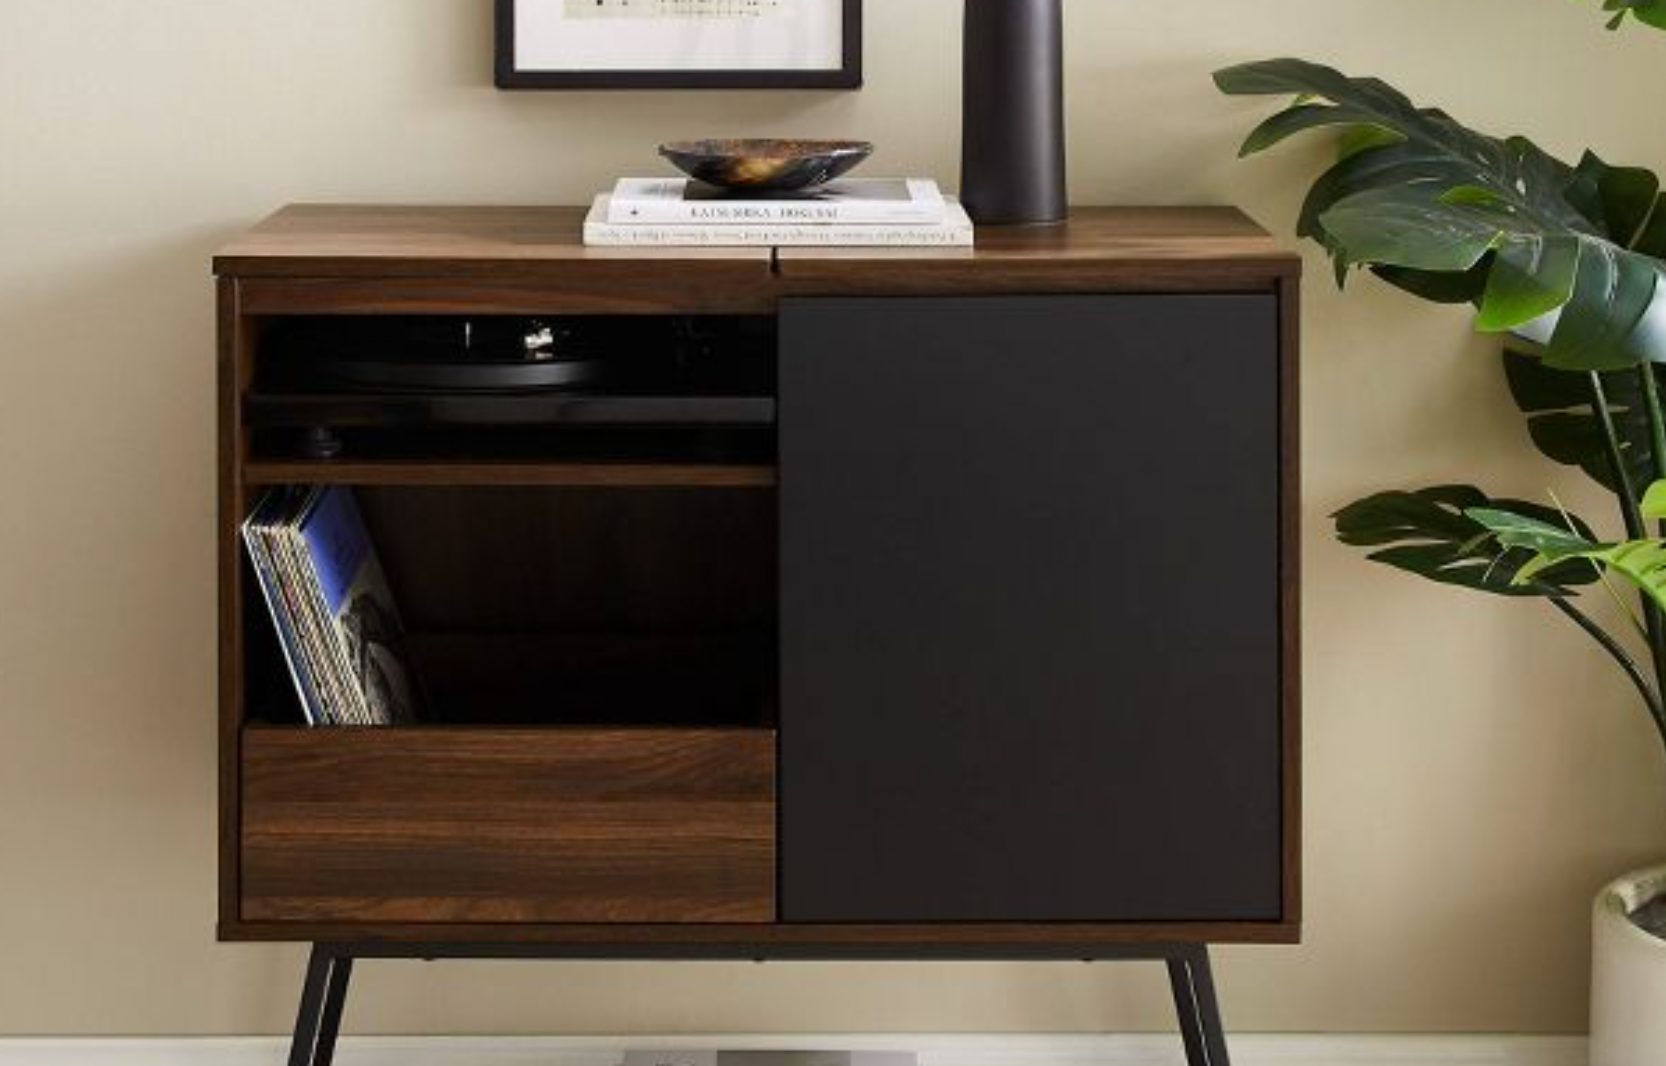 a black and brown media cabinet holding records and a record player